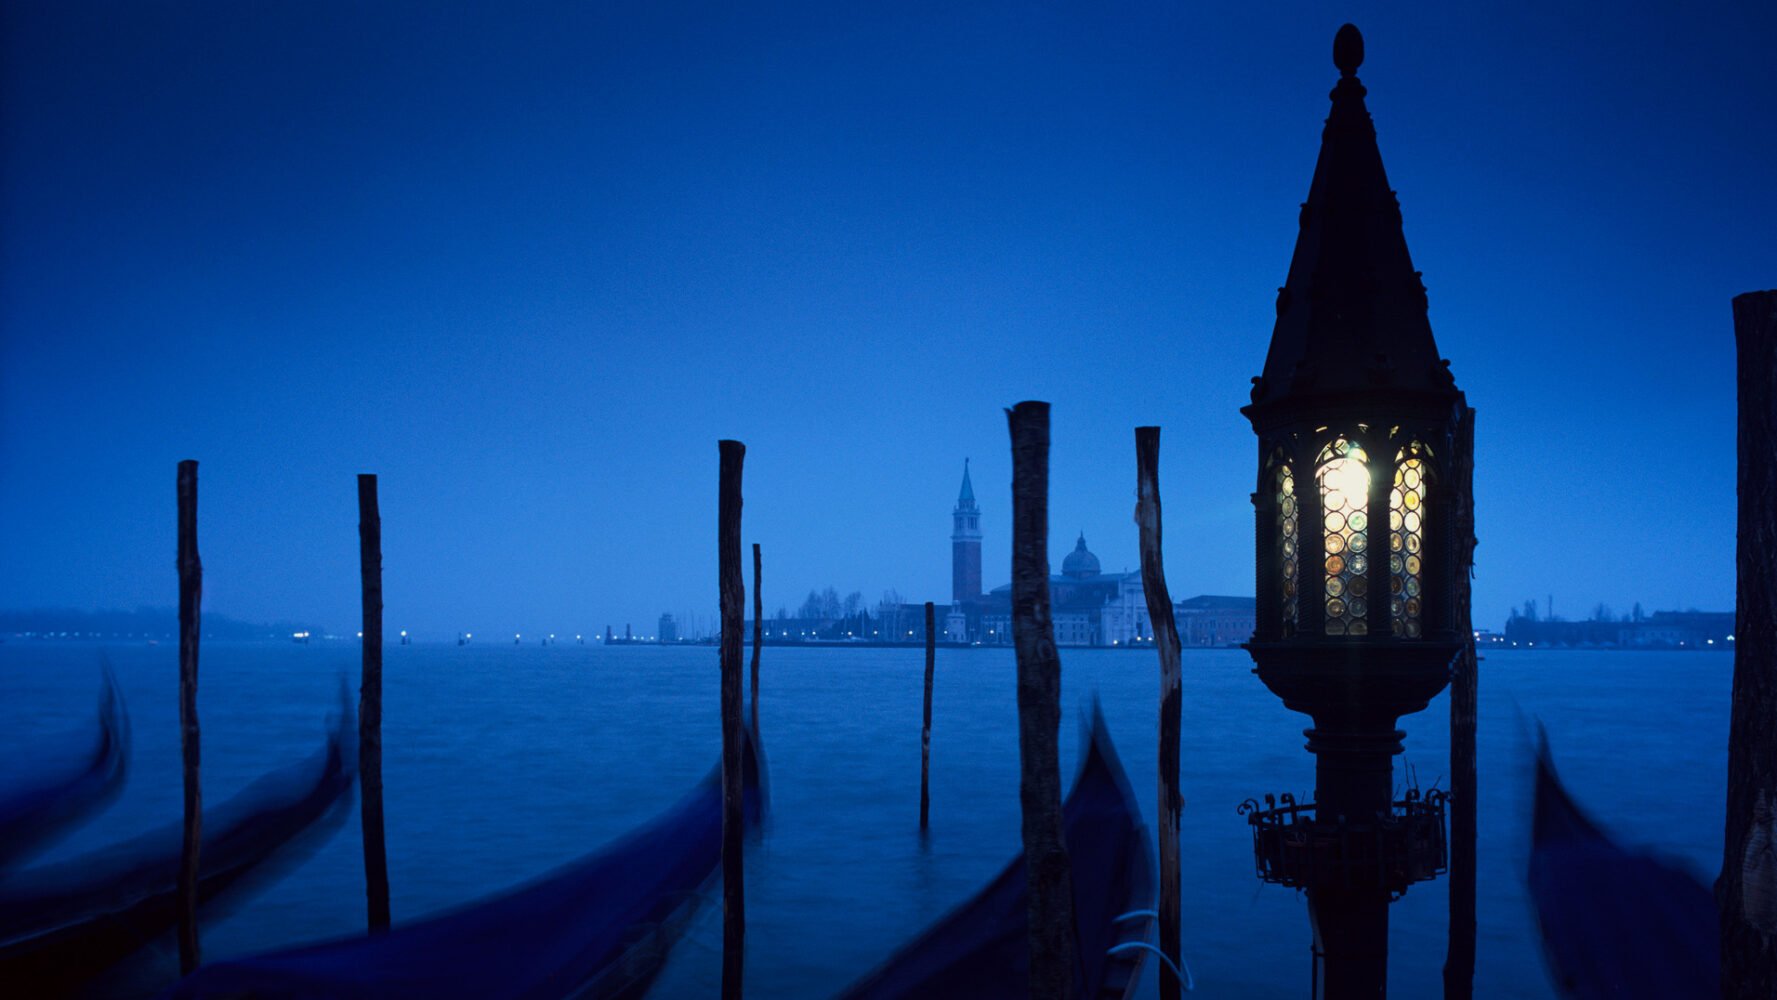 a lit lantern and vacant gondolas sit at night on a Venice canal with the Saint Mark's Bell Tower in the distance